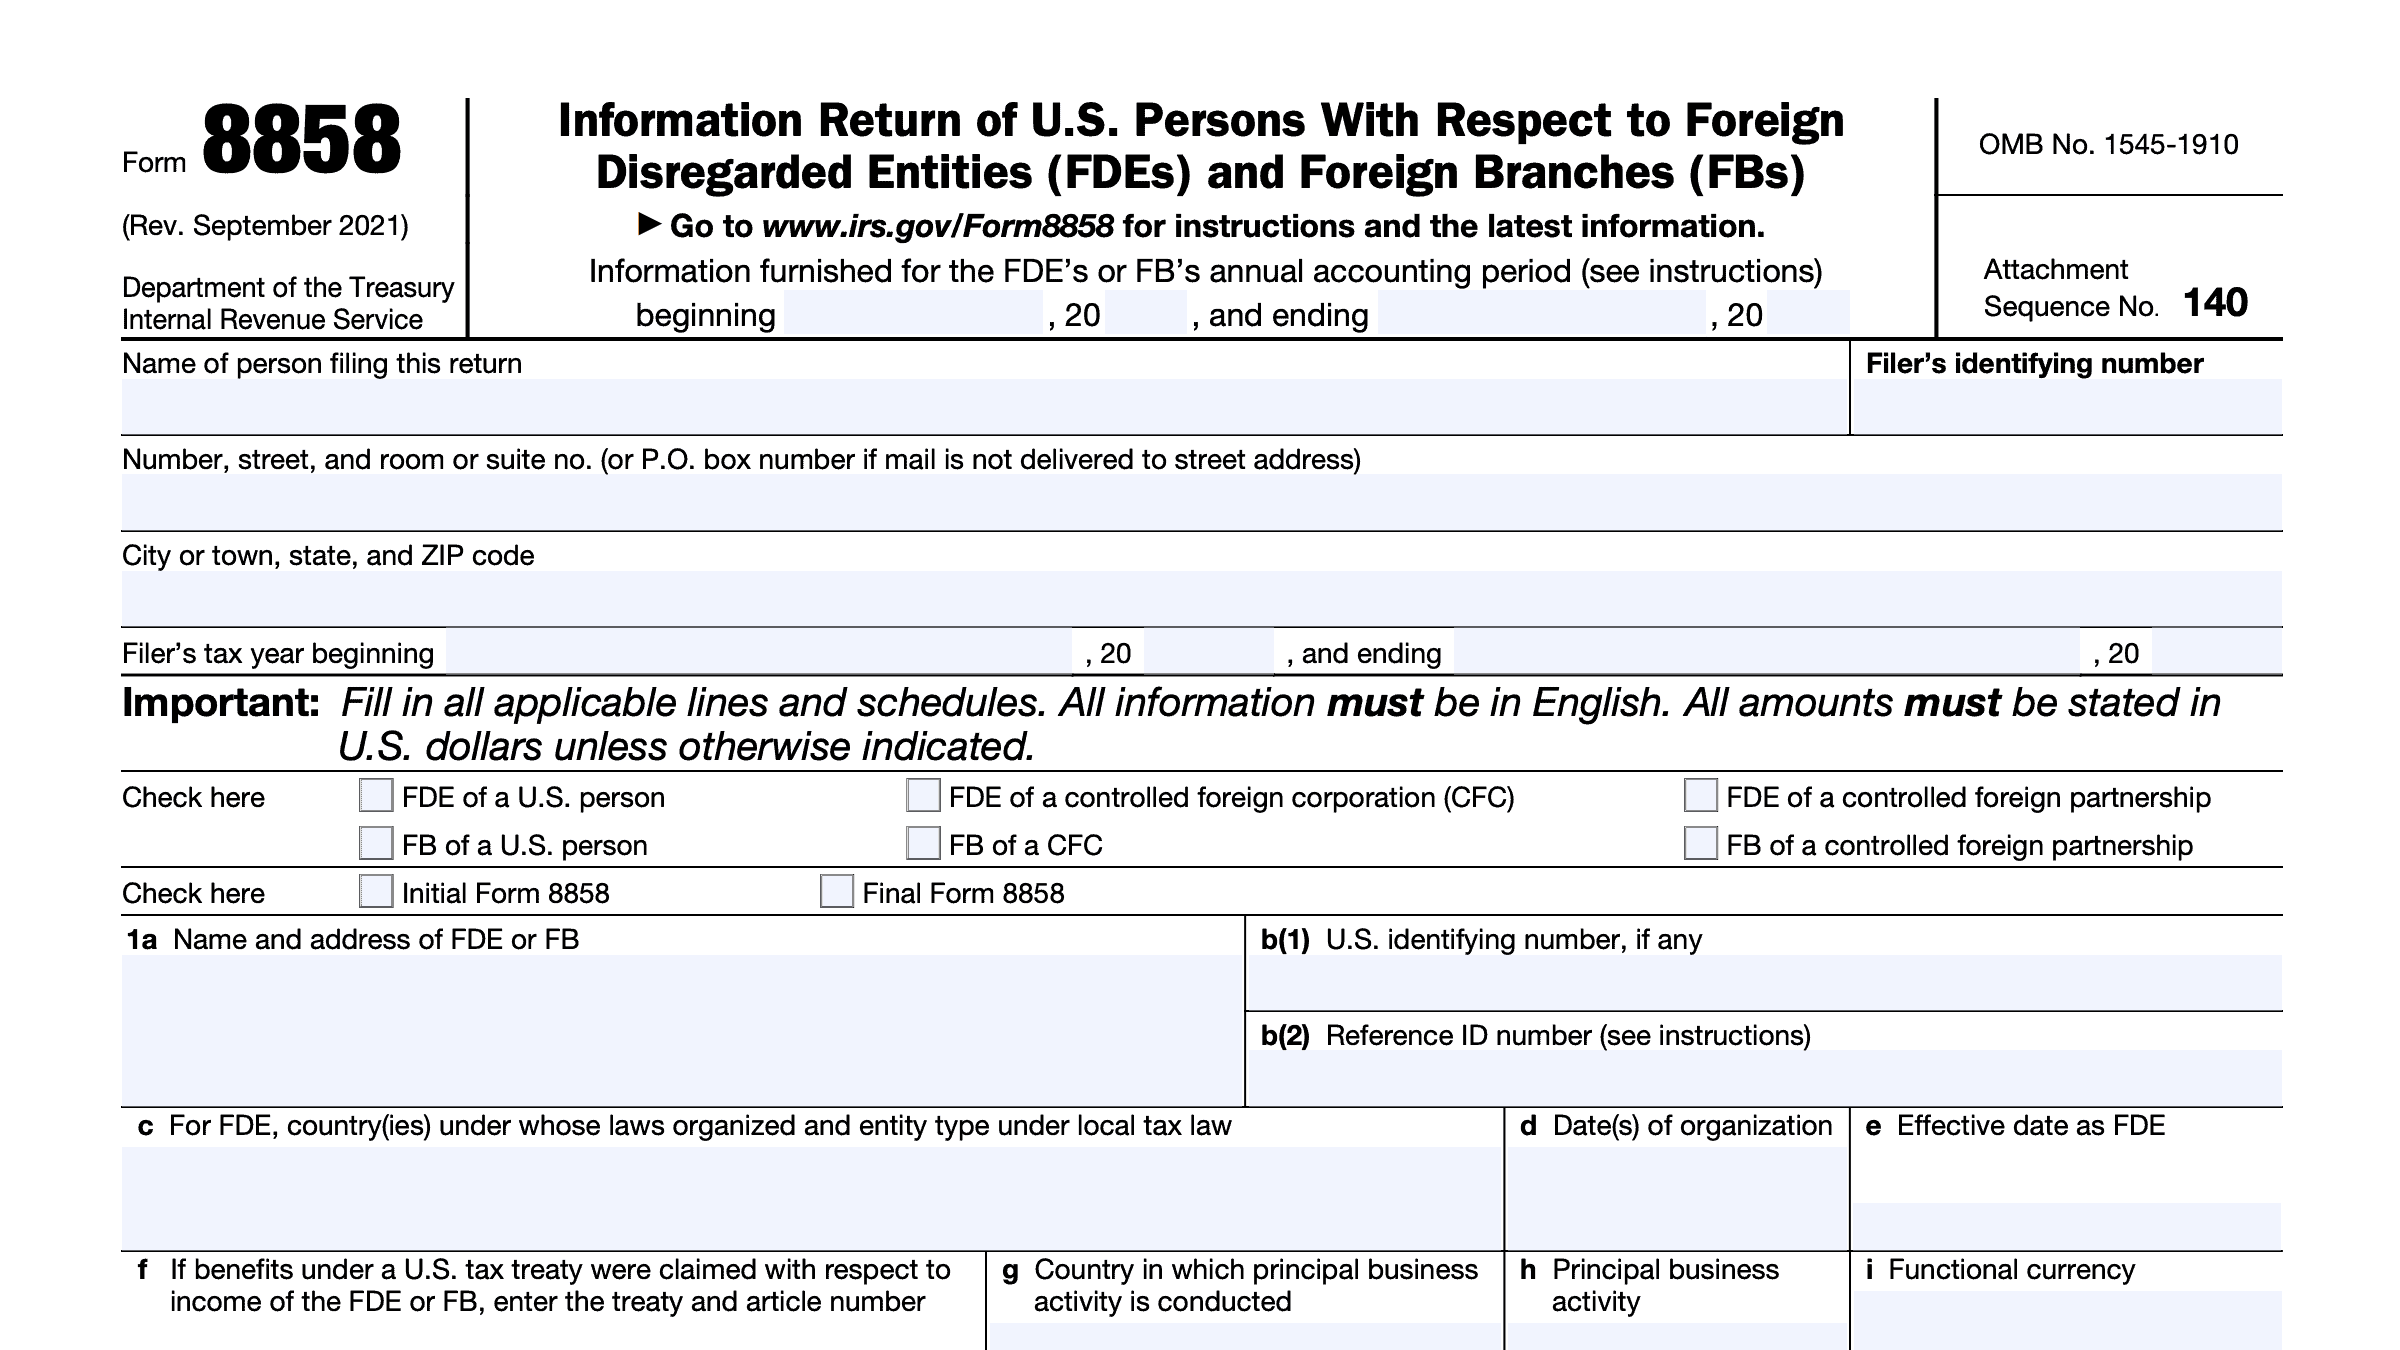 IRS Form 8858 Instructions Information Return for FDEs & FBs